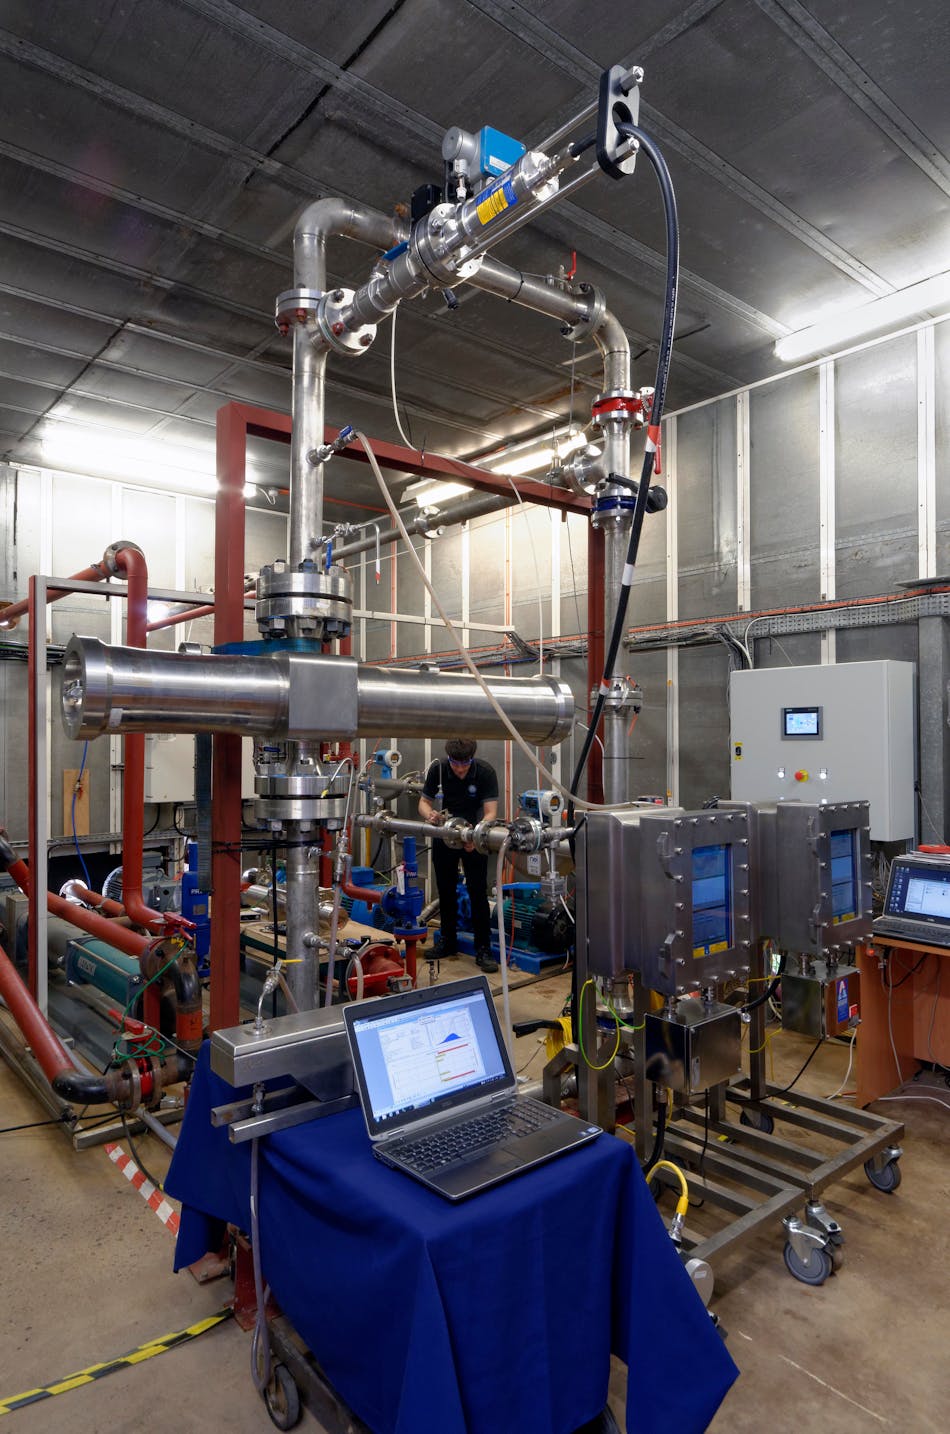 Online oil-in-water monitors under testing at TÜV SÜD National Engineering Laboratory.